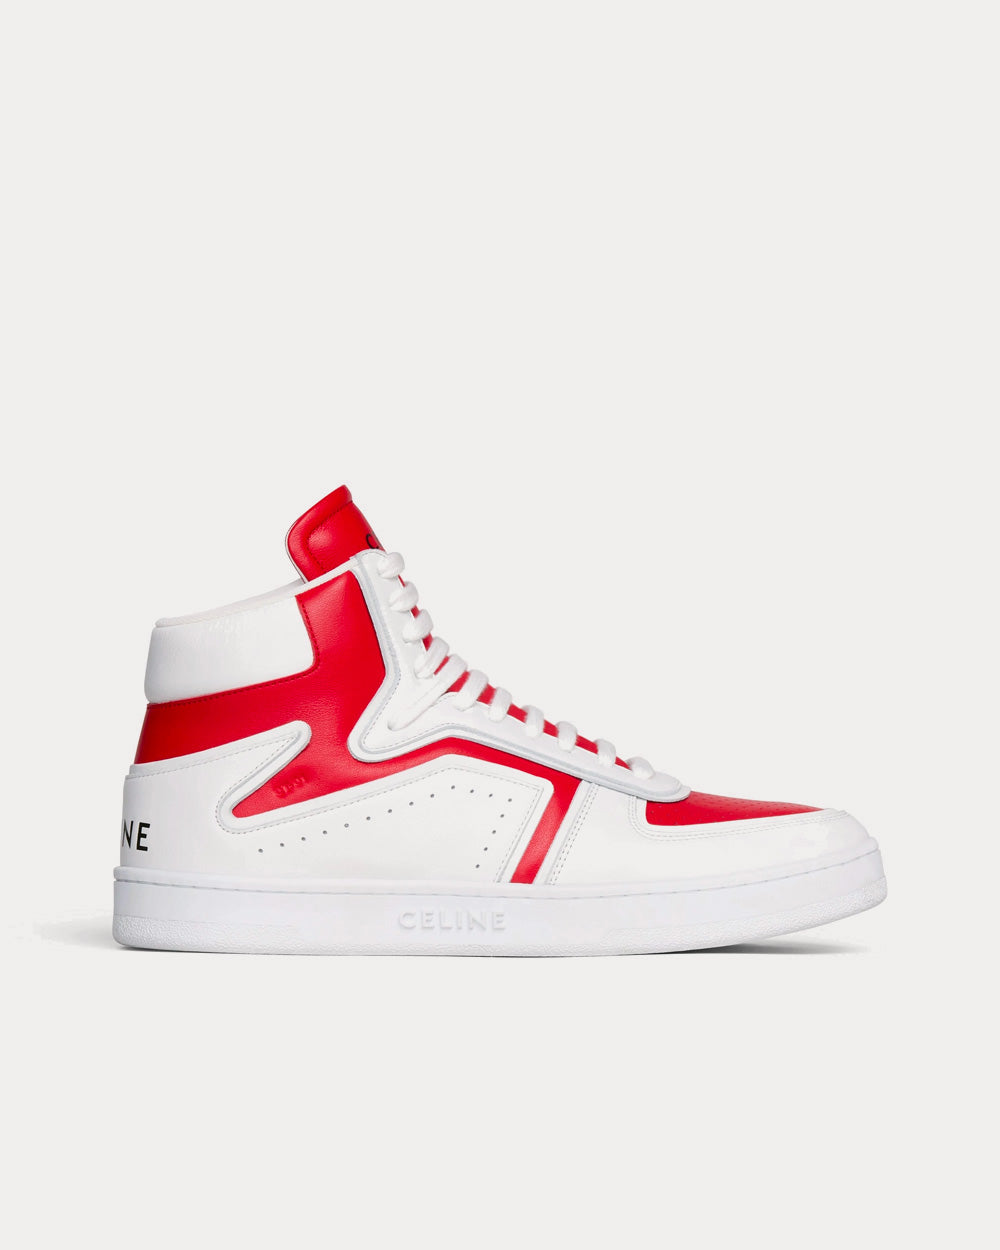 CT-01 Z Calfskin Optic White / Red High Top Sneakers